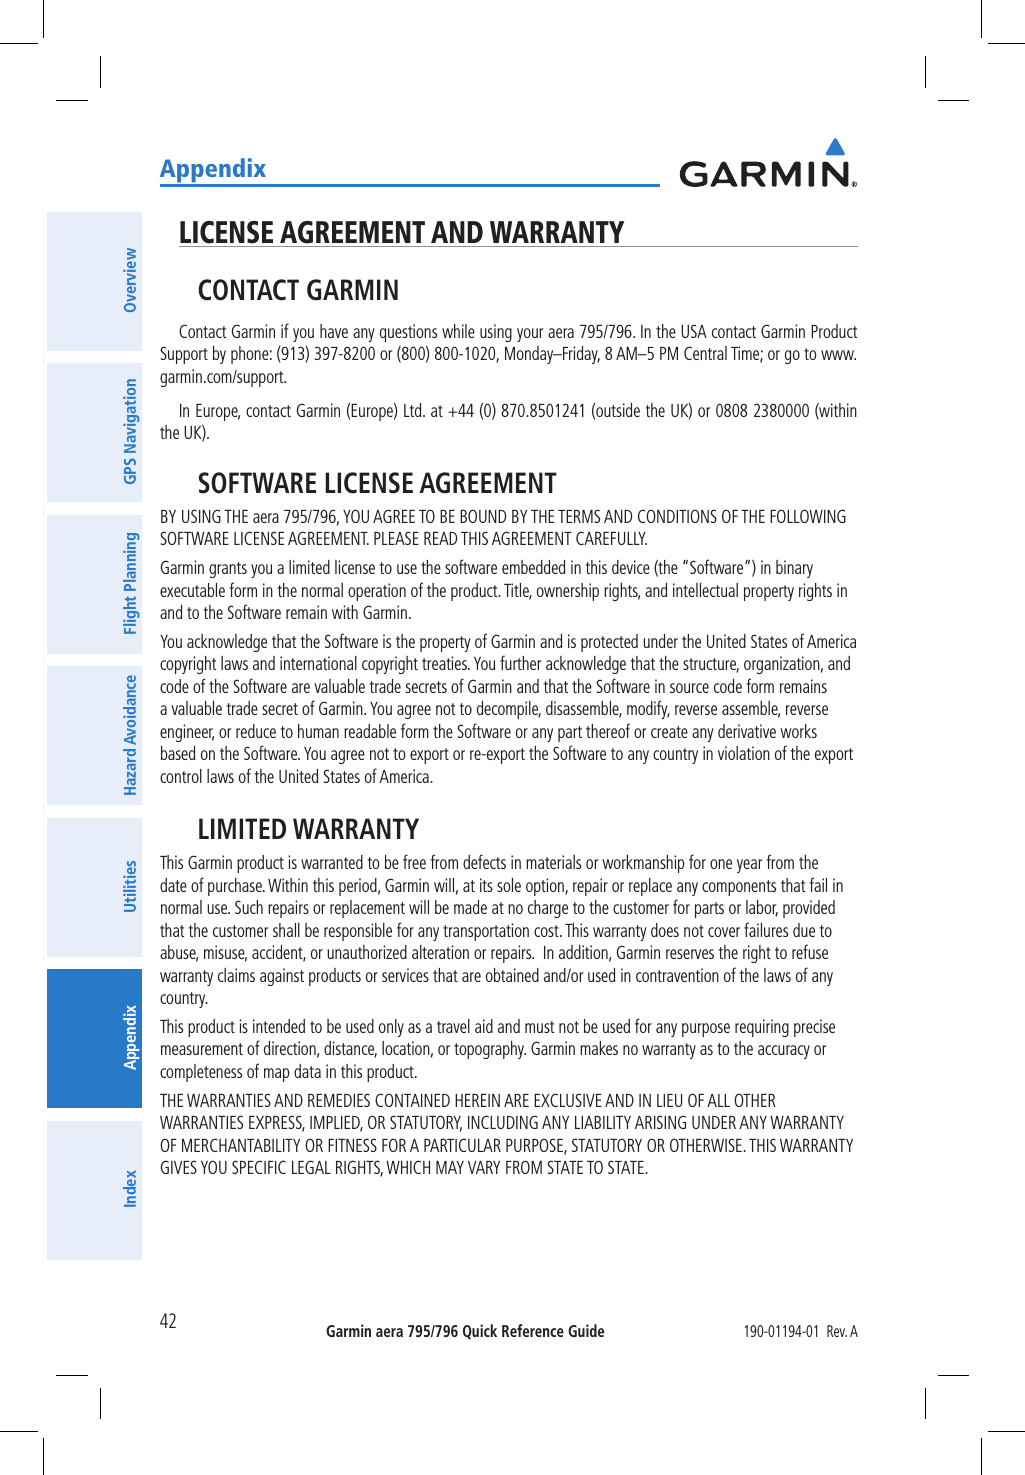 Garmin aera 795/796 Quick Reference Guide190-01194-01  Rev. AAppendix42OverviewGPS NavigationFlight PlanningHazard AvoidanceUtilitiesAppendixIndexLICENSE AGREEMENT AND WARRANTYCONTACT GARMINContact Garmin if you have any questions while using your aera 795/796. In the USA contact Garmin Product Support by phone: (913) 397-8200 or (800) 800-1020, Monday–Friday, 8 AM–5 PM Central Time; or go to www.garmin.com/support.In Europe, contact Garmin (Europe) Ltd. at +44 (0) 870.8501241 (outside the UK) or 0808 2380000 (within the UK).SOFTWARE LICENSE AGREEMENTBY USING THE aera 795/796, YOU AGREE TO BE BOUND BY THE TERMS AND CONDITIONS OF THE FOLLOWING SOFTWARE LICENSE AGREEMENT. PLEASE READ THIS AGREEMENT CAREFULLY.Garmin grants you a limited license to use the software embedded in this device (the “Software”) in binary executable form in the normal operation of the product. Title, ownership rights, and intellectual property rights in and to the Software remain with Garmin.You acknowledge that the Software is the property of Garmin and is protected under the United States of America copyright laws and international copyright treaties. You further acknowledge that the structure, organization, and code of the Software are valuable trade secrets of Garmin and that the Software in source code form remains a valuable trade secret of Garmin. You agree not to decompile, disassemble, modify, reverse assemble, reverse engineer, or reduce to human readable form the Software or any part thereof or create any derivative works based on the Software. You agree not to export or re-export the Software to any country in violation of the export control laws of the United States of America.LIMITED WARRANTYThis Garmin product is warranted to be free from defects in materials or workmanship for one year from the date of purchase. Within this period, Garmin will, at its sole option, repair or replace any components that fail in normal use. Such repairs or replacement will be made at no charge to the customer for parts or labor, provided that the customer shall be responsible for any transportation cost. This warranty does not cover failures due to abuse, misuse, accident, or unauthorized alteration or repairs.  In addition, Garmin reserves the right to refuse warranty claims against products or services that are obtained and/or used in contravention of the laws of any country.This product is intended to be used only as a travel aid and must not be used for any purpose requiring precise measurement of direction, distance, location, or topography. Garmin makes no warranty as to the accuracy or completeness of map data in this product.THE WARRANTIES AND REMEDIES CONTAINED HEREIN ARE EXCLUSIVE AND IN LIEU OF ALL OTHER WARRANTIES EXPRESS, IMPLIED, OR STATUTORY, INCLUDING ANY LIABILITY ARISING UNDER ANY WARRANTY OF MERCHANTABILITY OR FITNESS FOR A PARTICULAR PURPOSE, STATUTORY OR OTHERWISE. THIS WARRANTY GIVES YOU SPECIFIC LEGAL RIGHTS, WHICH MAY VARY FROM STATE TO STATE.